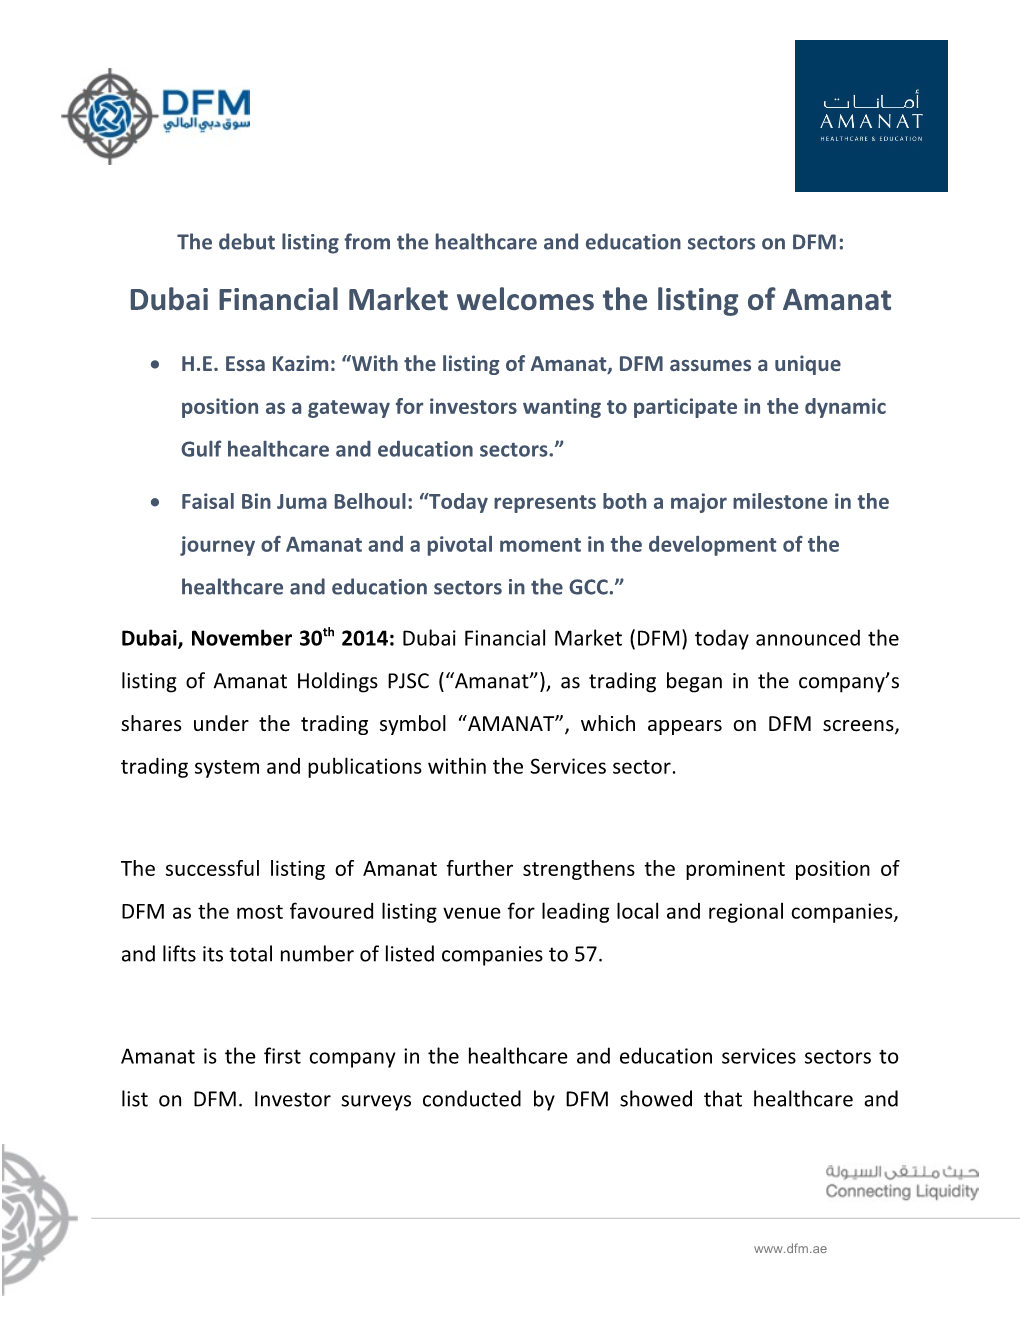 The Debut Listing from the Healthcare and Education Sectors on DFM